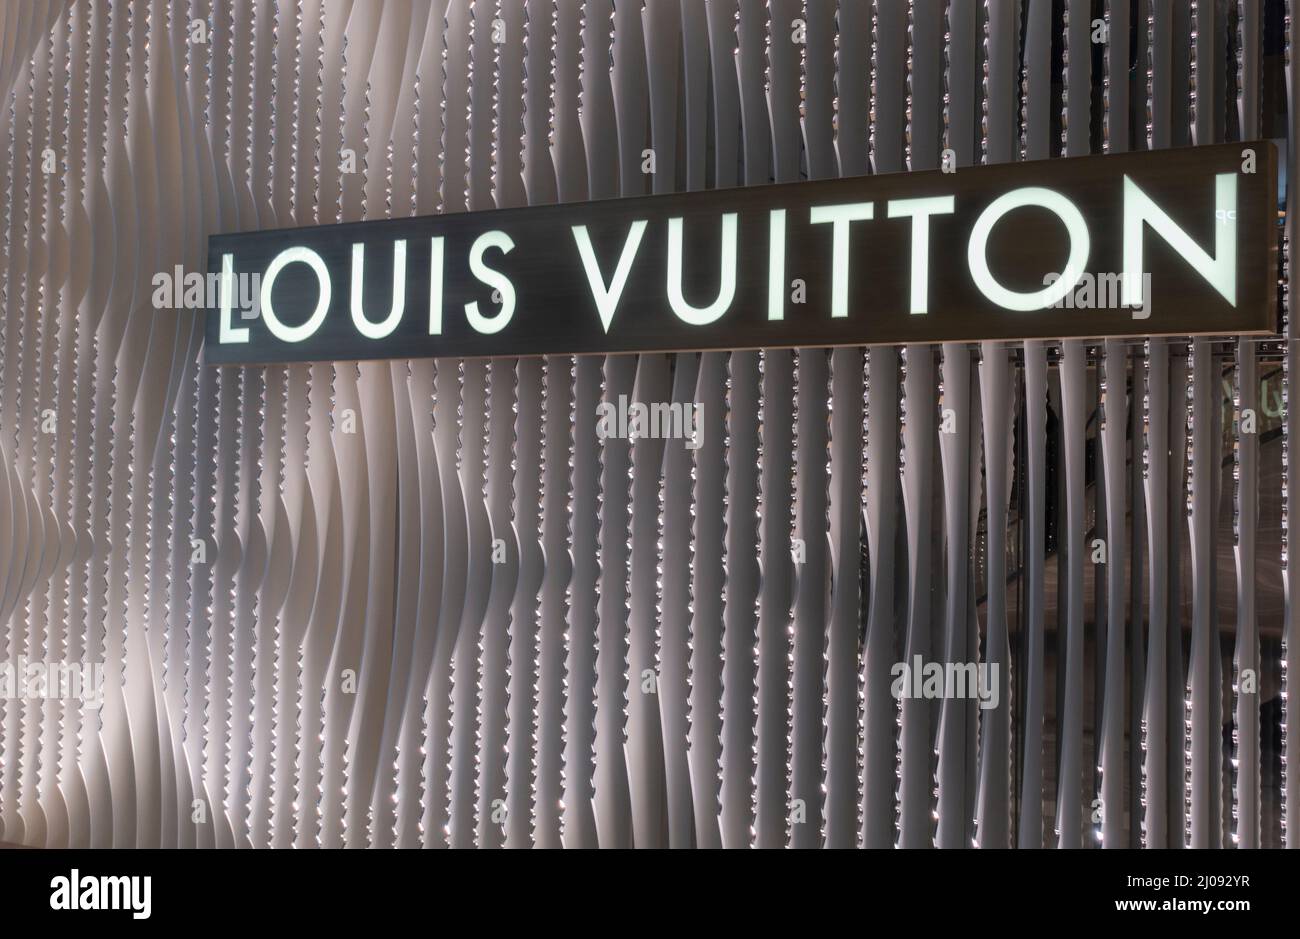 Louis Vuitton King of Prussia Men's store, United States